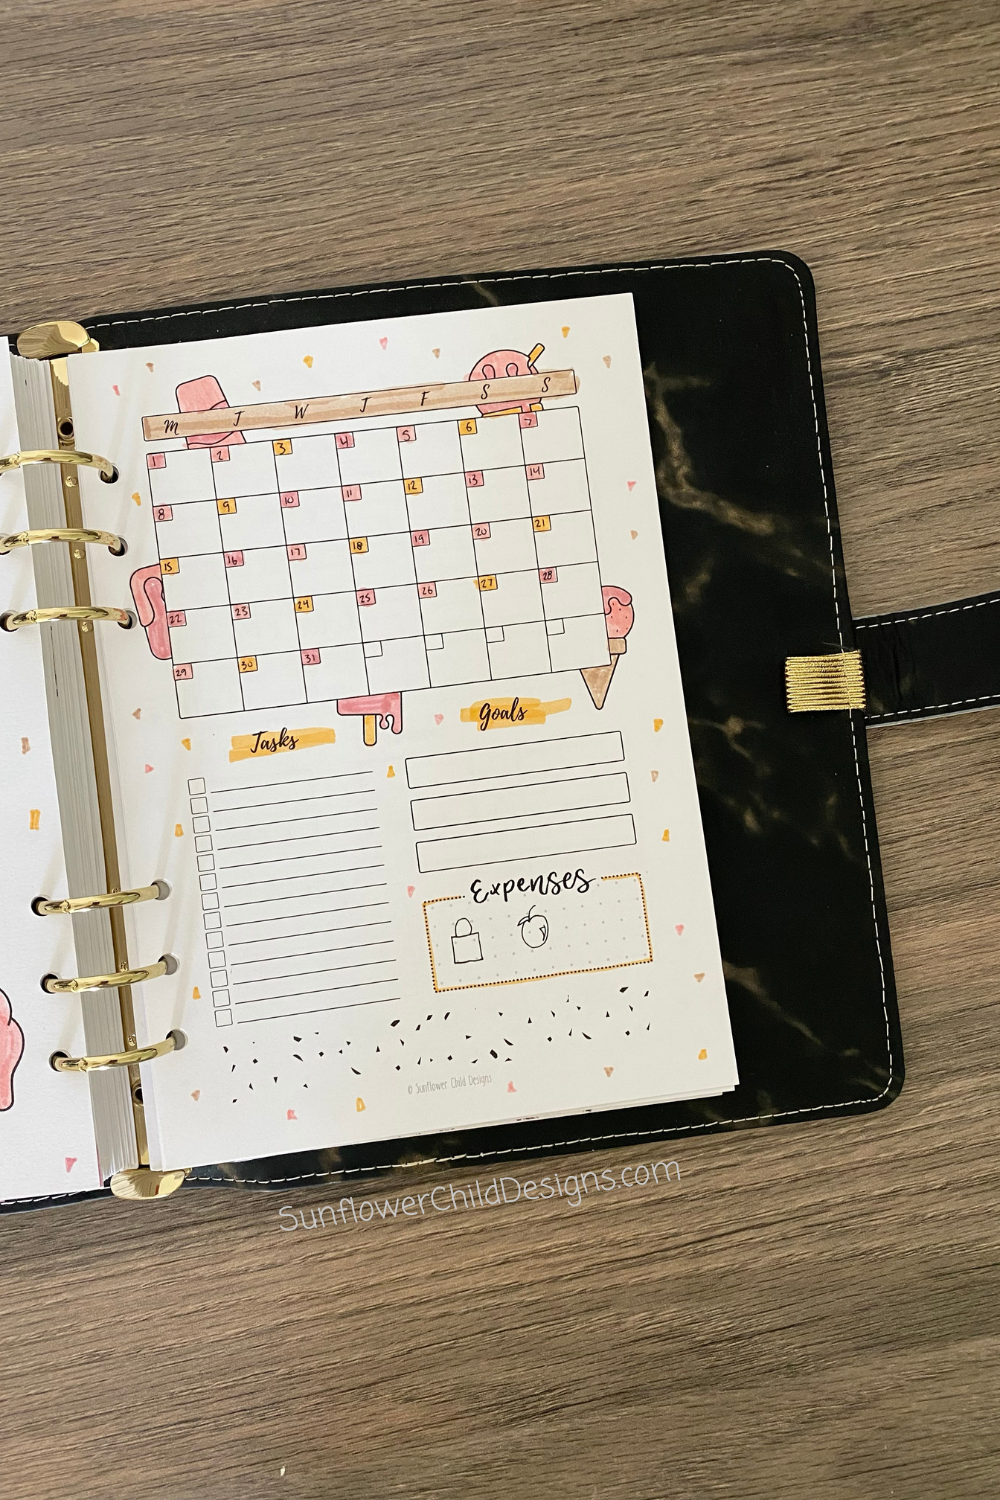 Monthly drawing prompts for Bullet Journaling - free printable